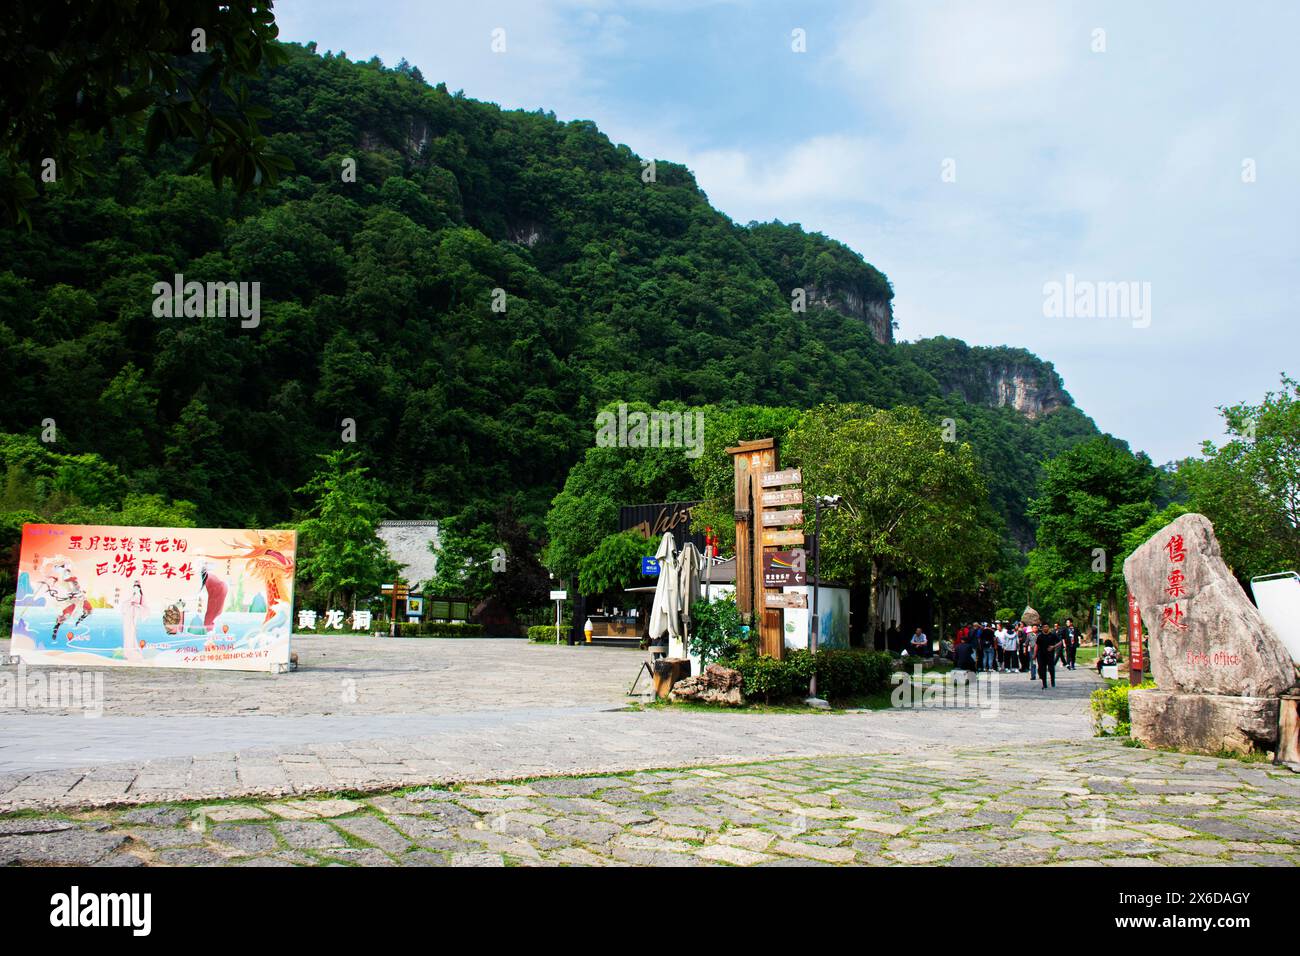 Chinese people and foreing travelers walking travel visit in Huanglong dong Paya Dragon Caven and Zhangjiajie Wulingyuan Yellow Dragon Cave at Huanglo Stock Photo